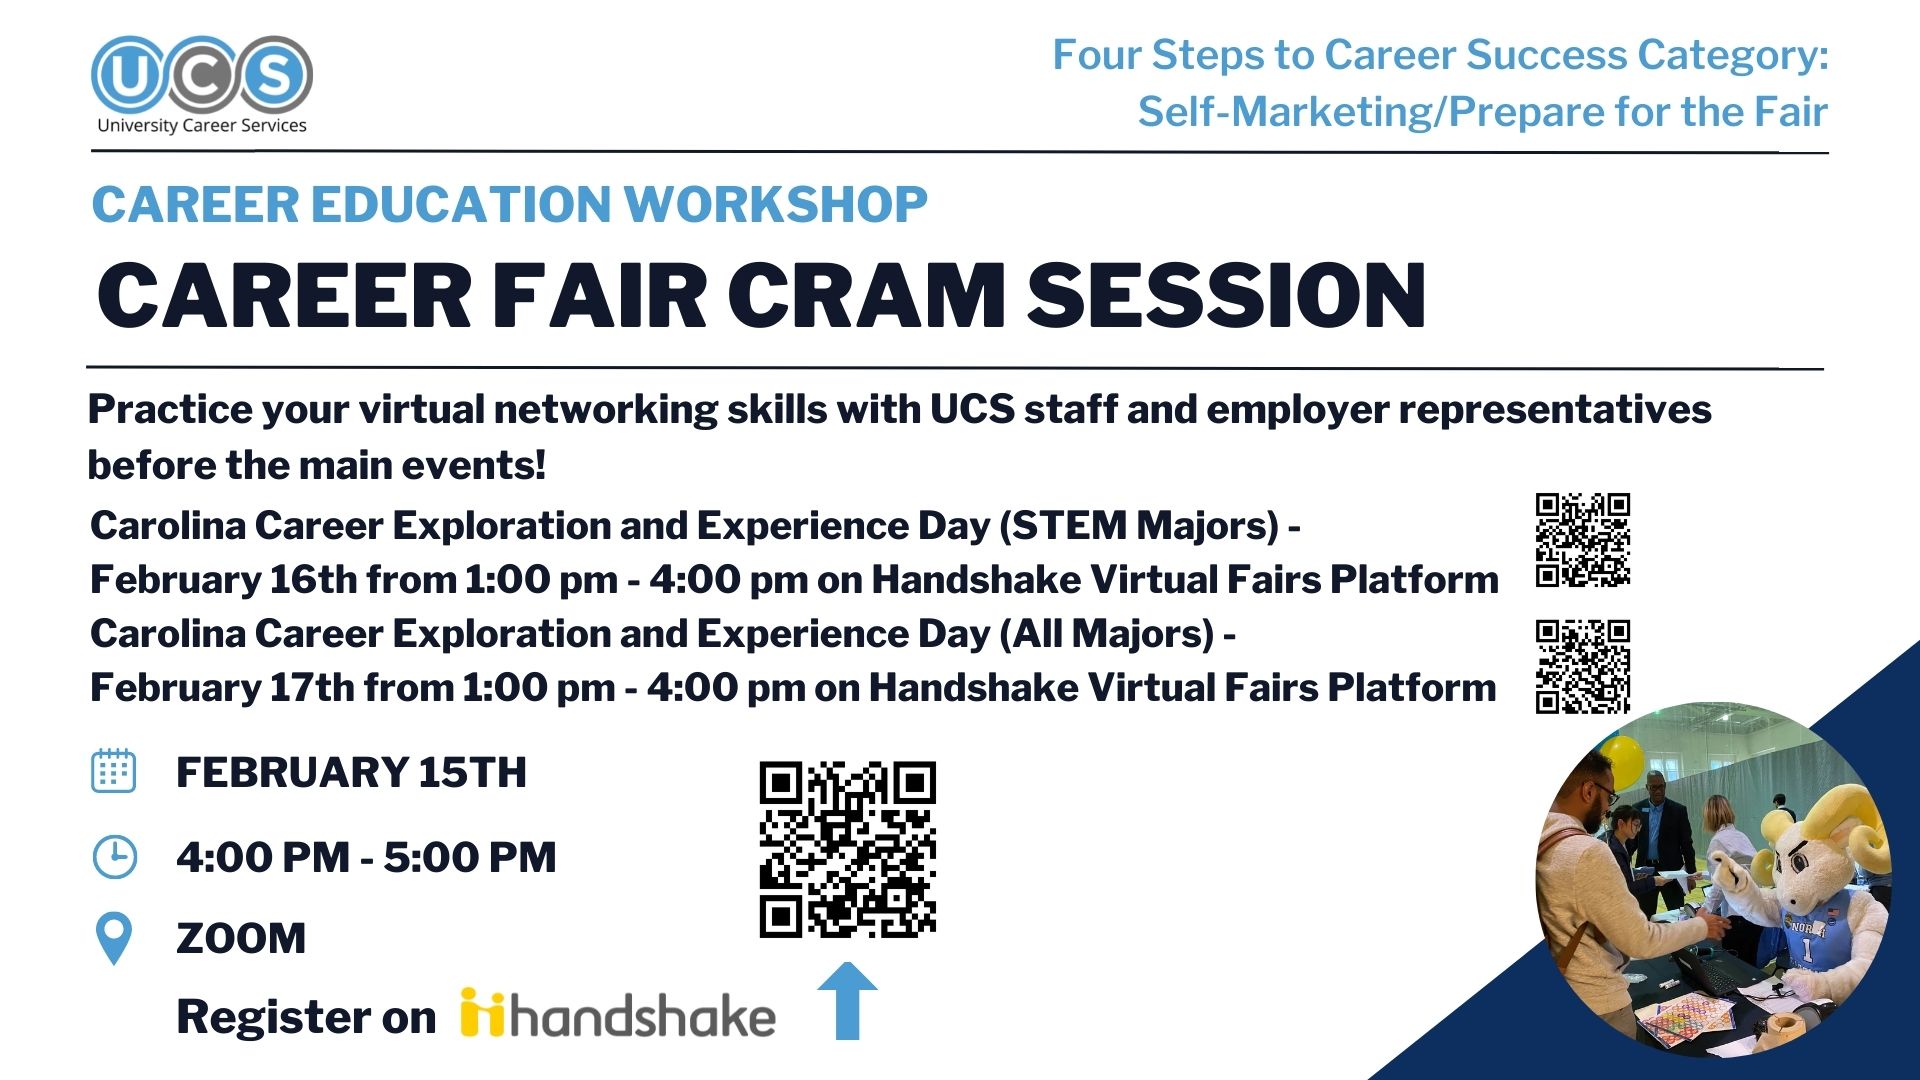 Practice your virtual networking skills with UCS staff and employer representatives before the main events!